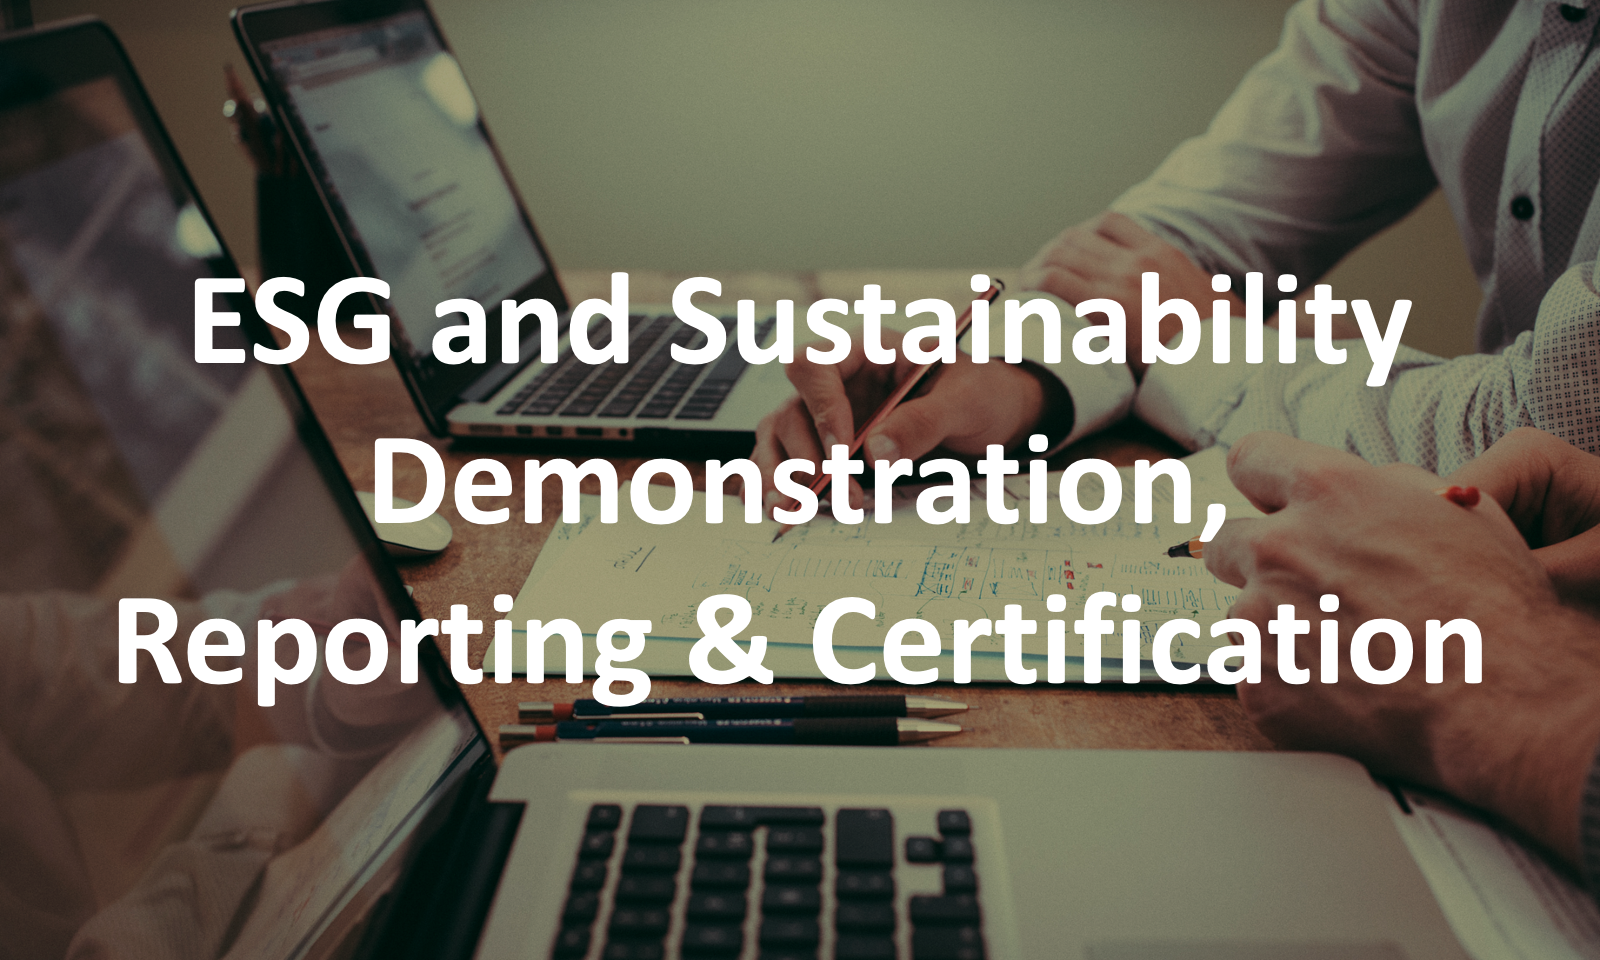  Safety and sustainability form the basis of sound governance, requiring organizations to measure and report on dynamic and diverse environmental performance standards.&nbsp;&nbsp;&nbsp;We provide expertise to assist in demonstrating sustainability, 